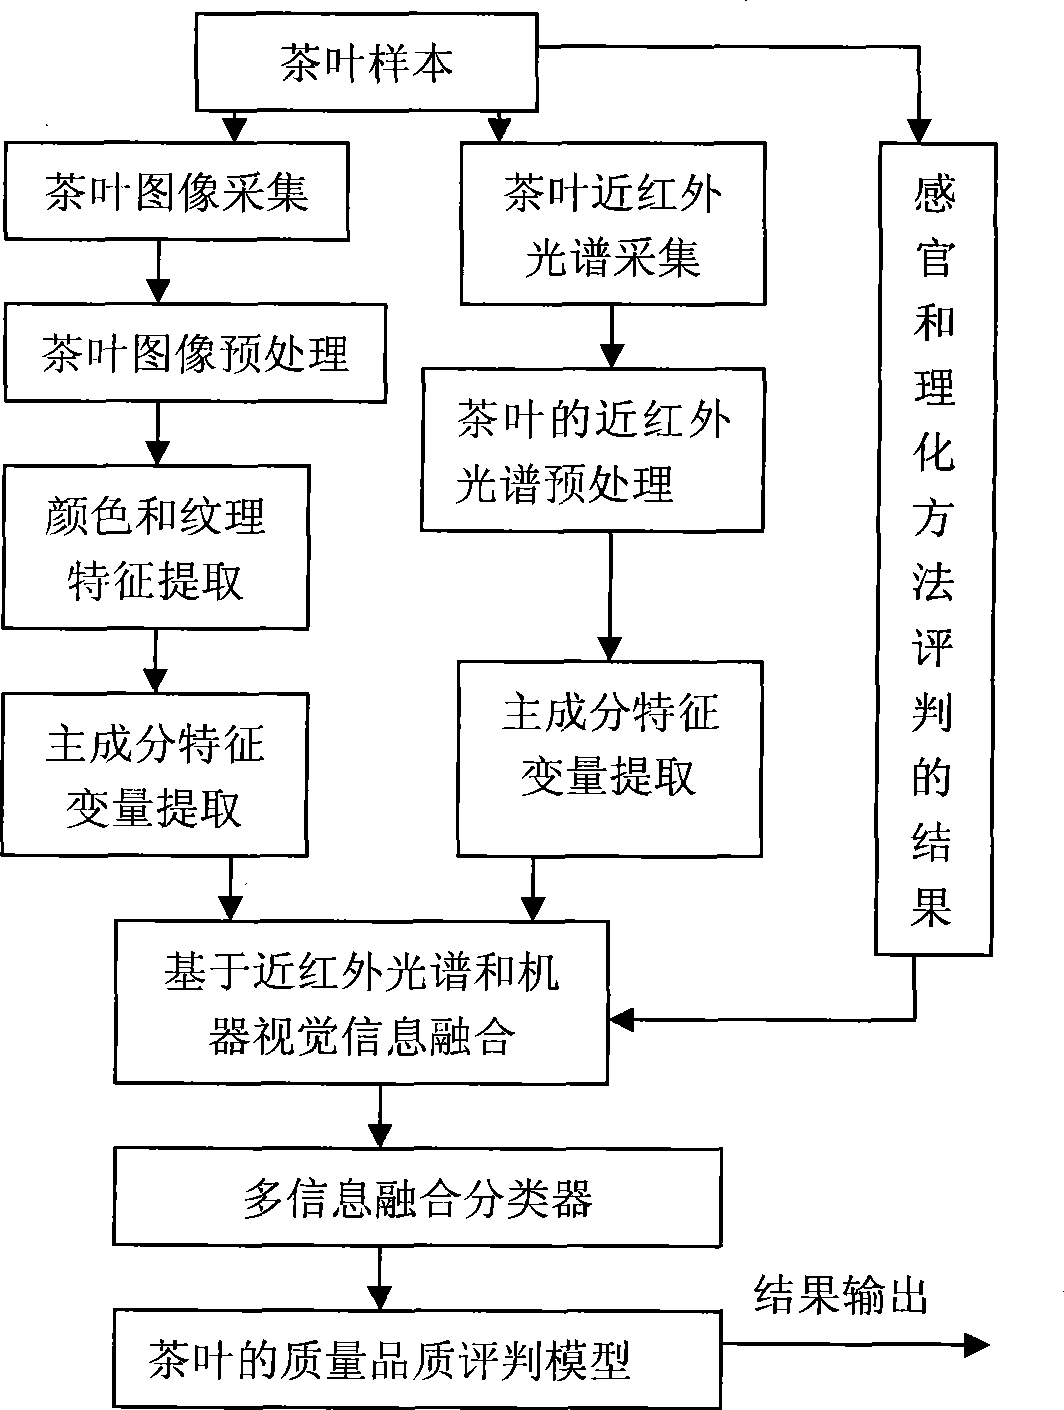 Tea quality nondestructive detecting method and device based on near-infrared spectrum and machine vision technology